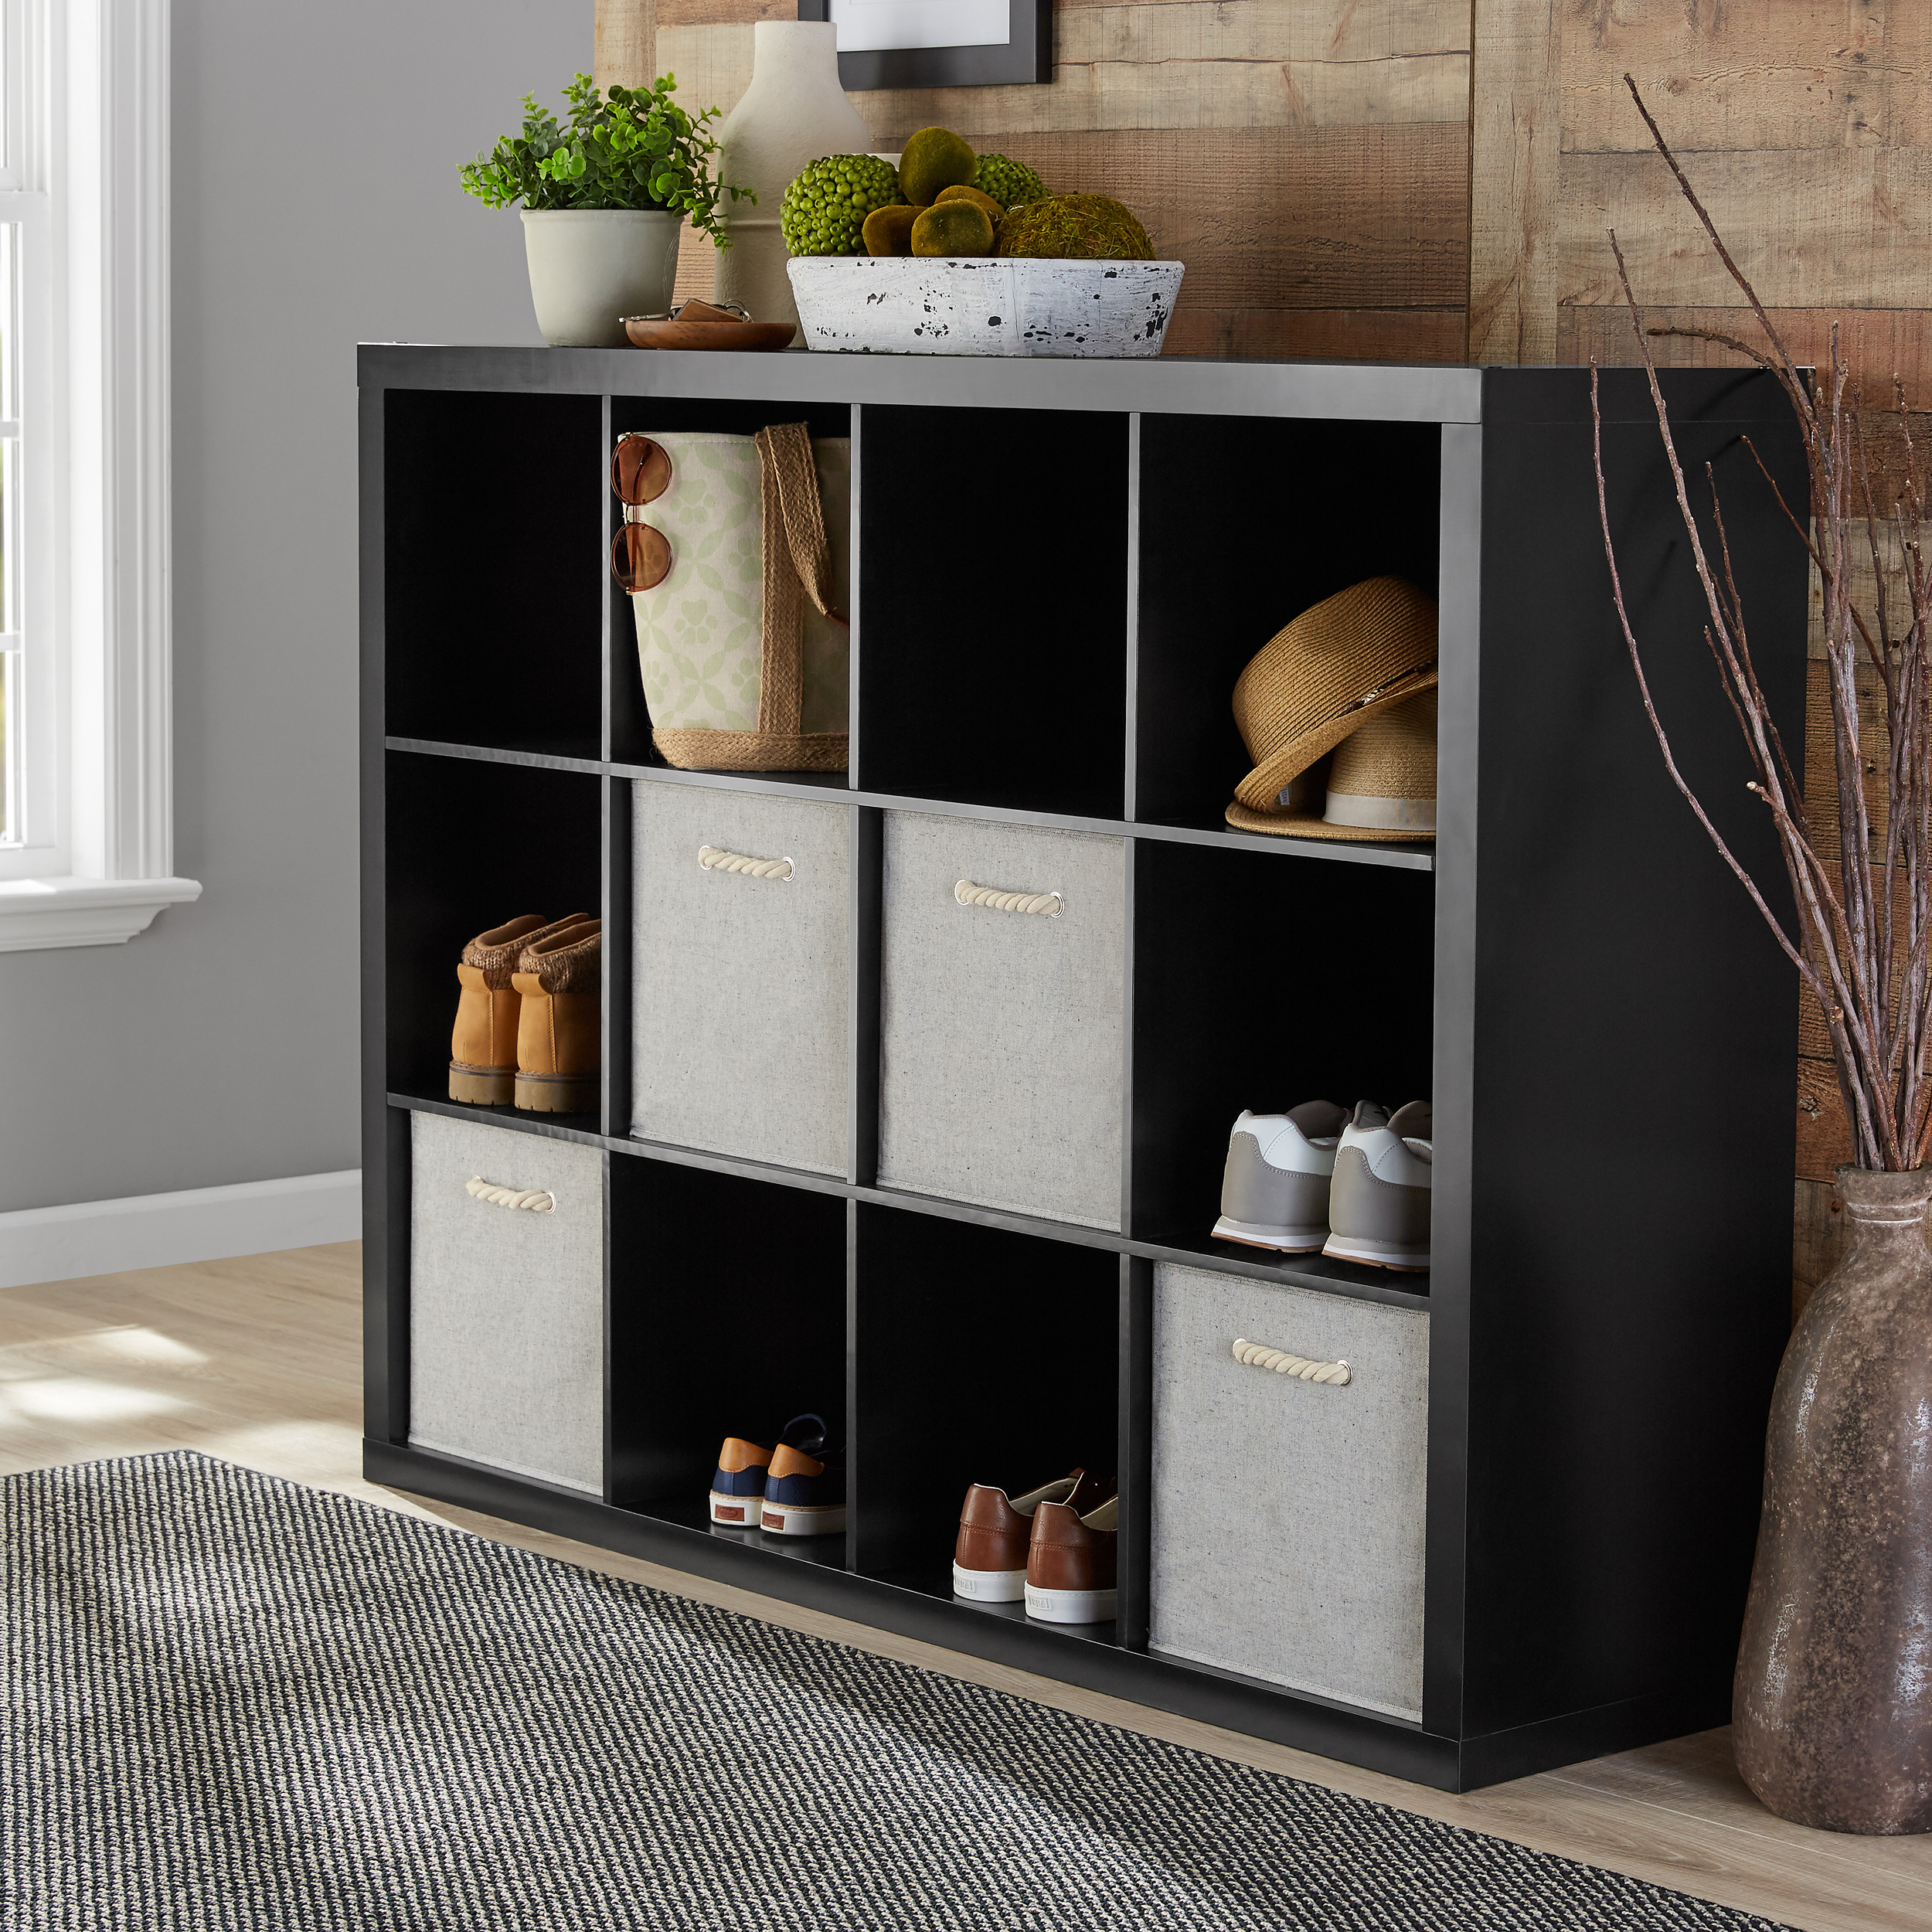 Better Homes & Gardens 12-Cube Storage Organizer, Solid Black - image 2 of 6